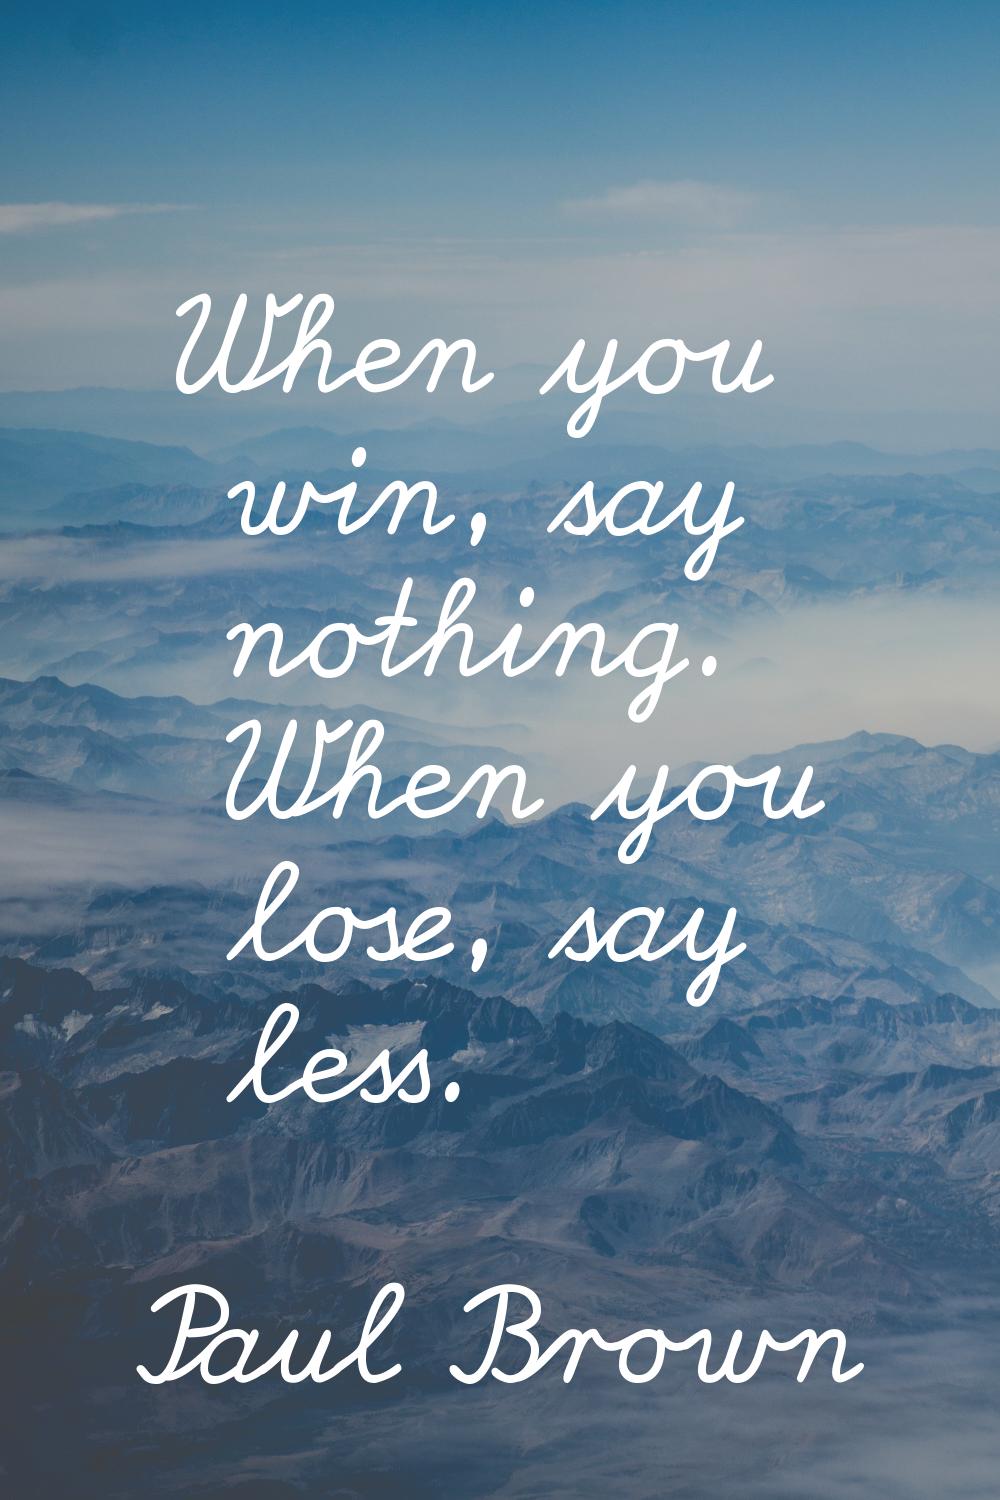 When you win, say nothing. When you lose, say less.